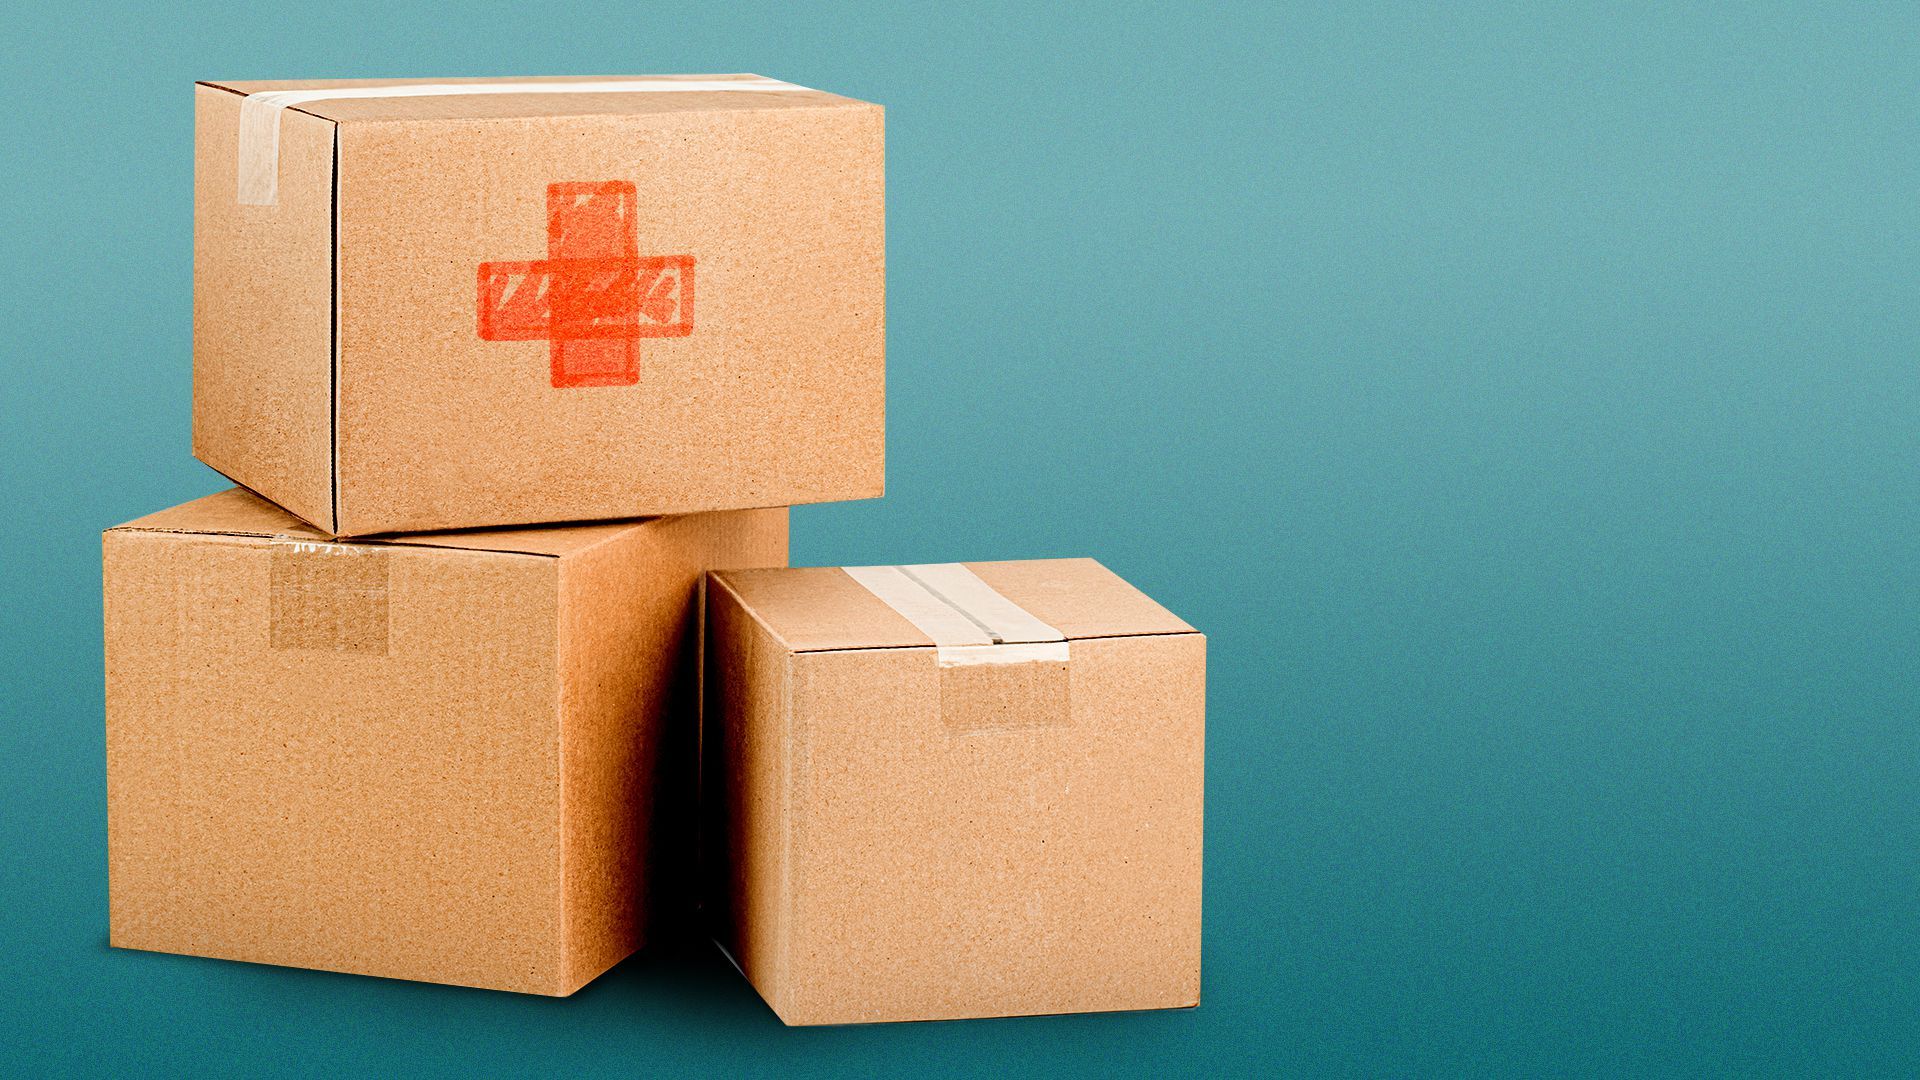 Illustration of moving boxes piled up with a red medical cross scribbled on the side of one box